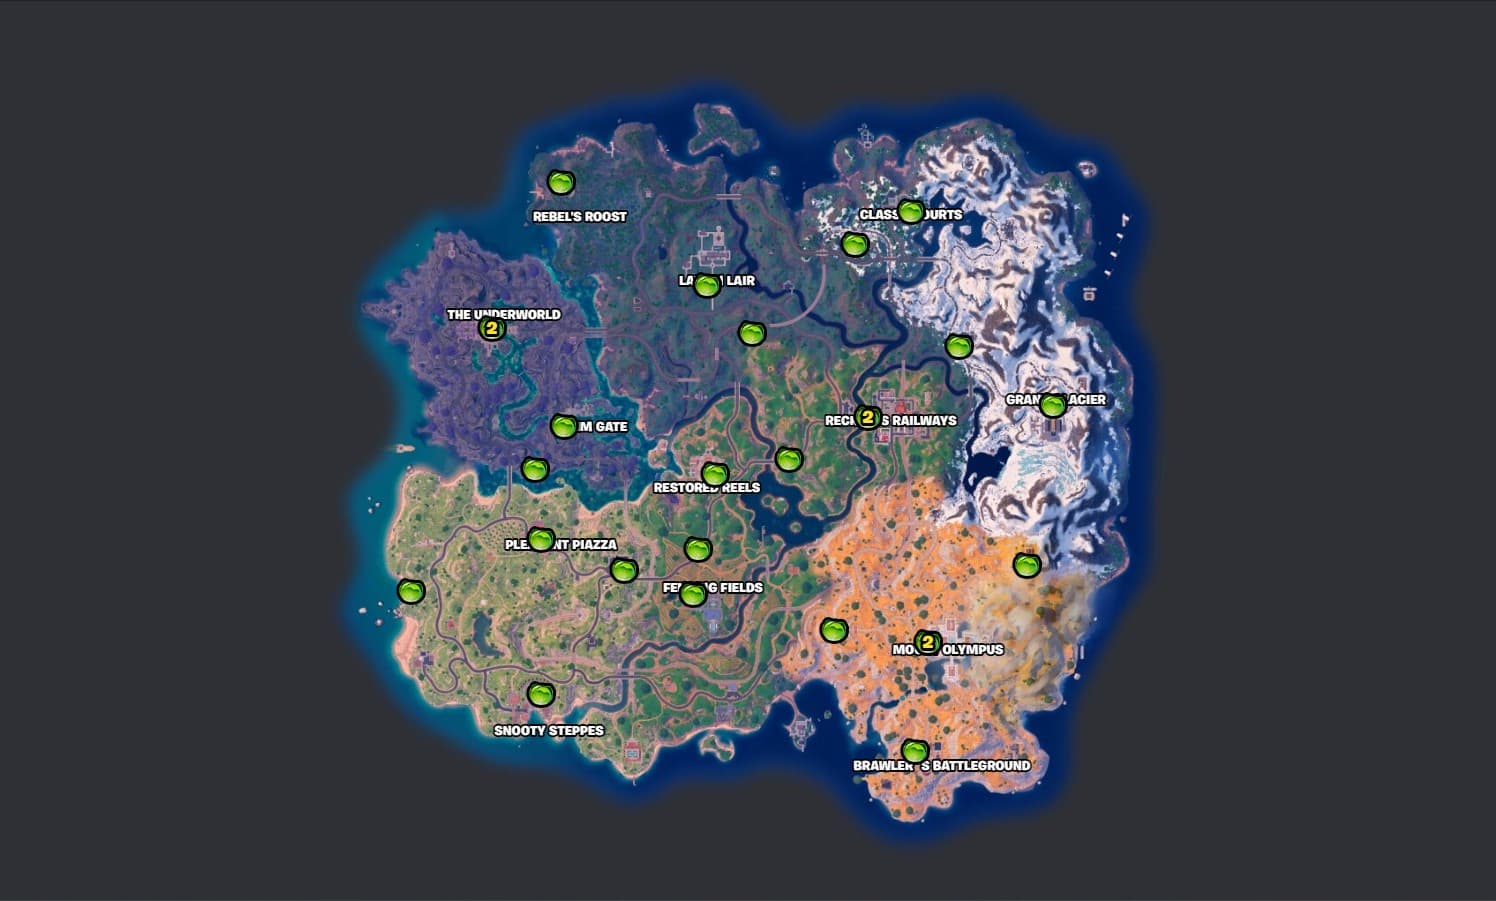 All cabbage cart locations on Fortnite's map